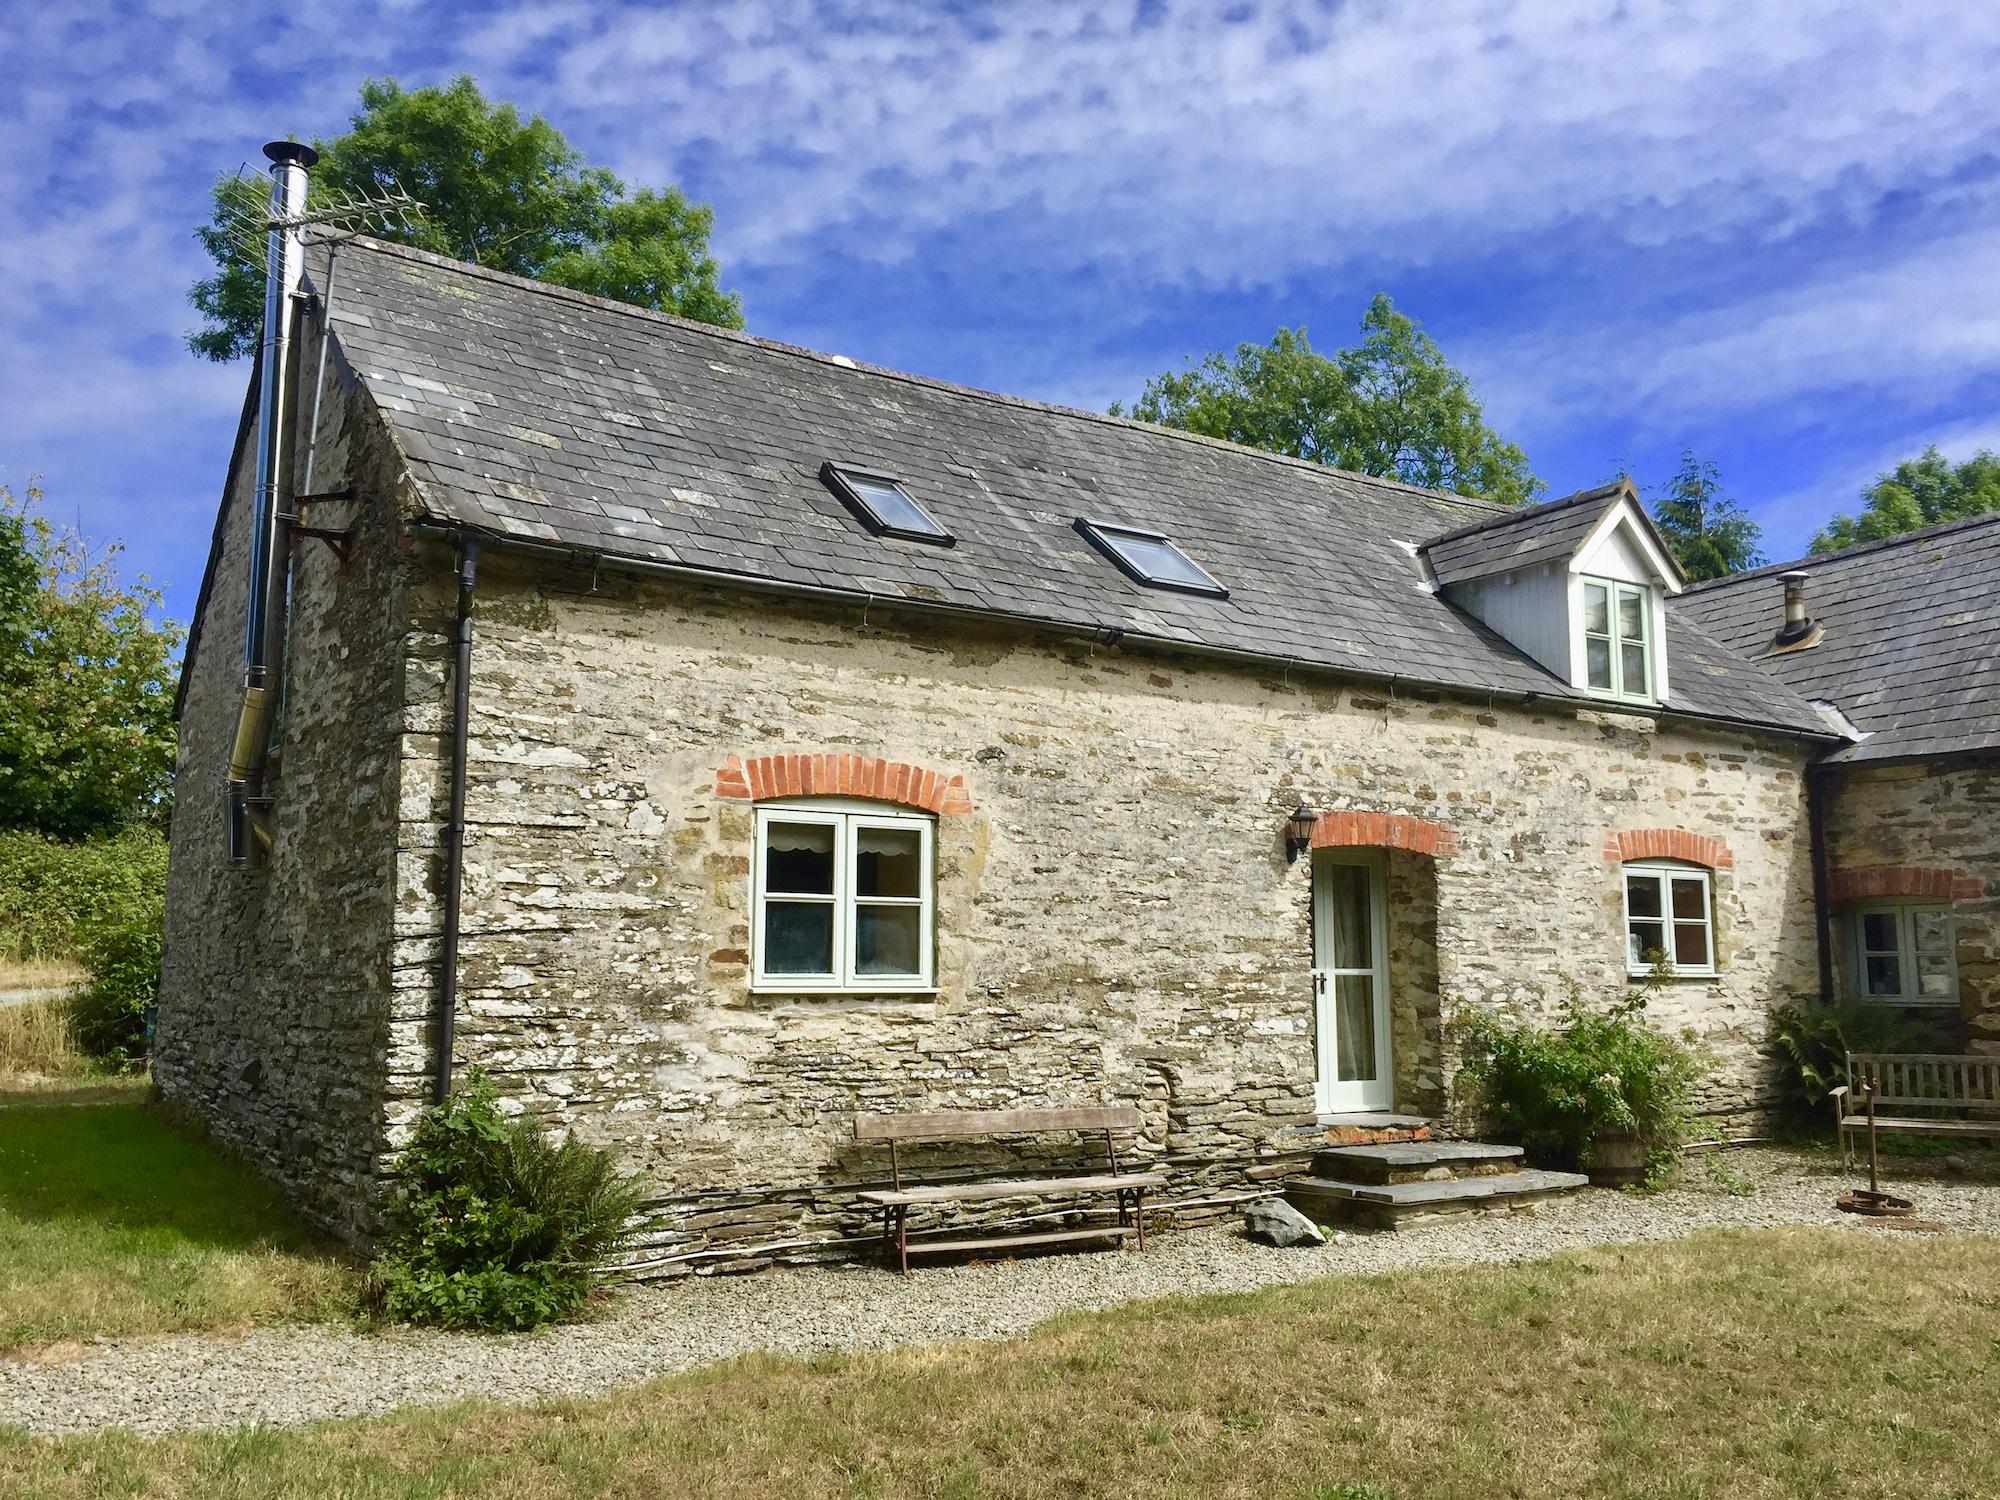 Self-Catering in Wales holidays at Cool Places